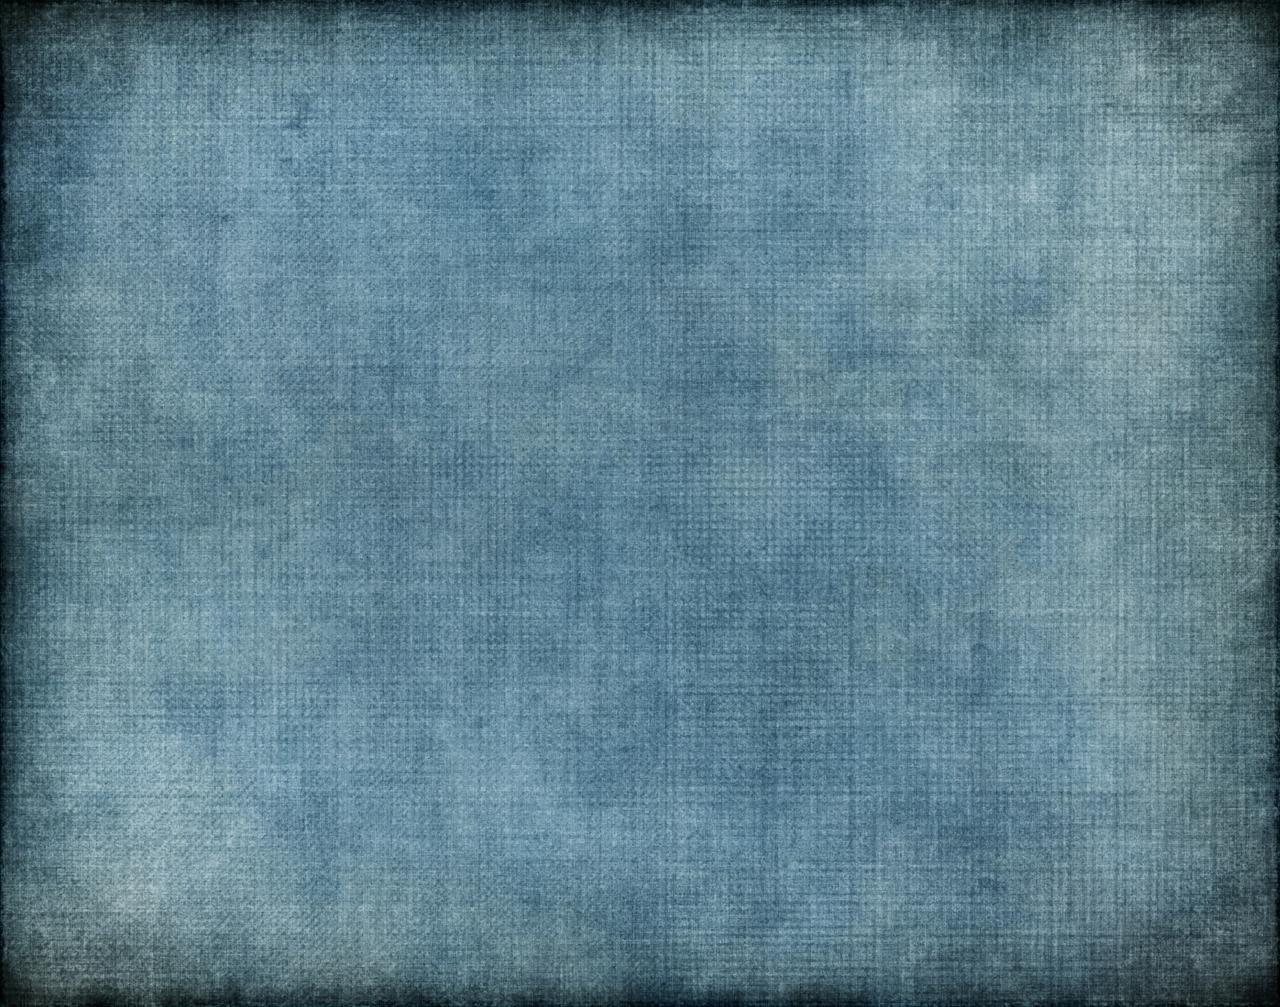 Icy Blue Abstract Backgrounds